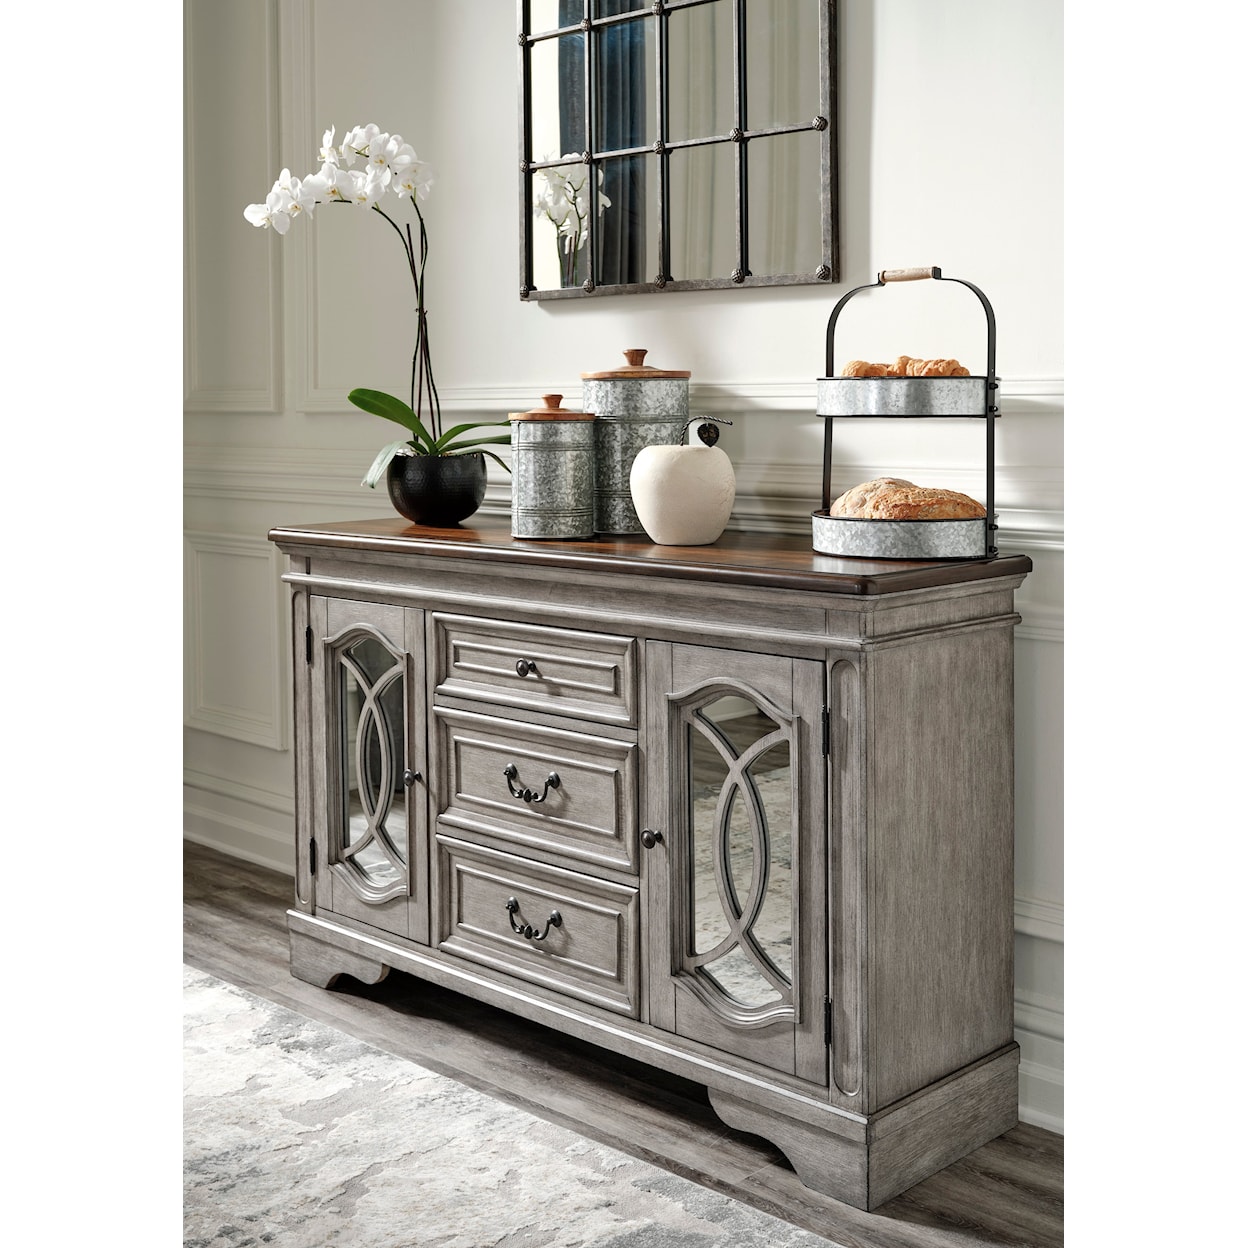 Signature Design by Ashley Lodenbay Dining Server